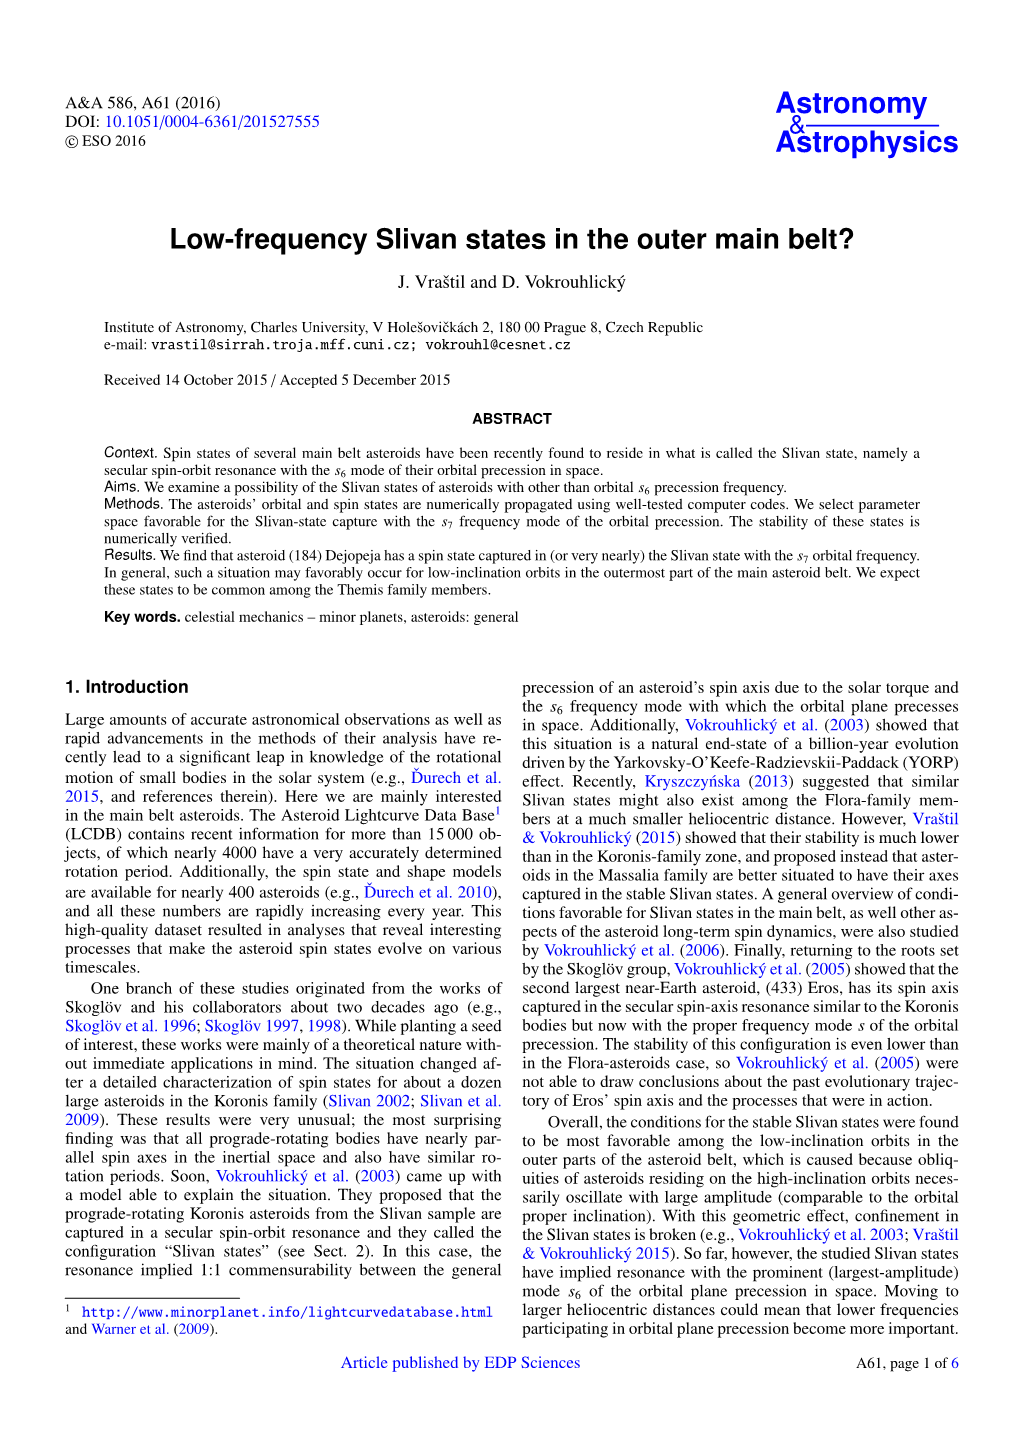 Low-Frequency Slivan States in the Outer Main Belt? J